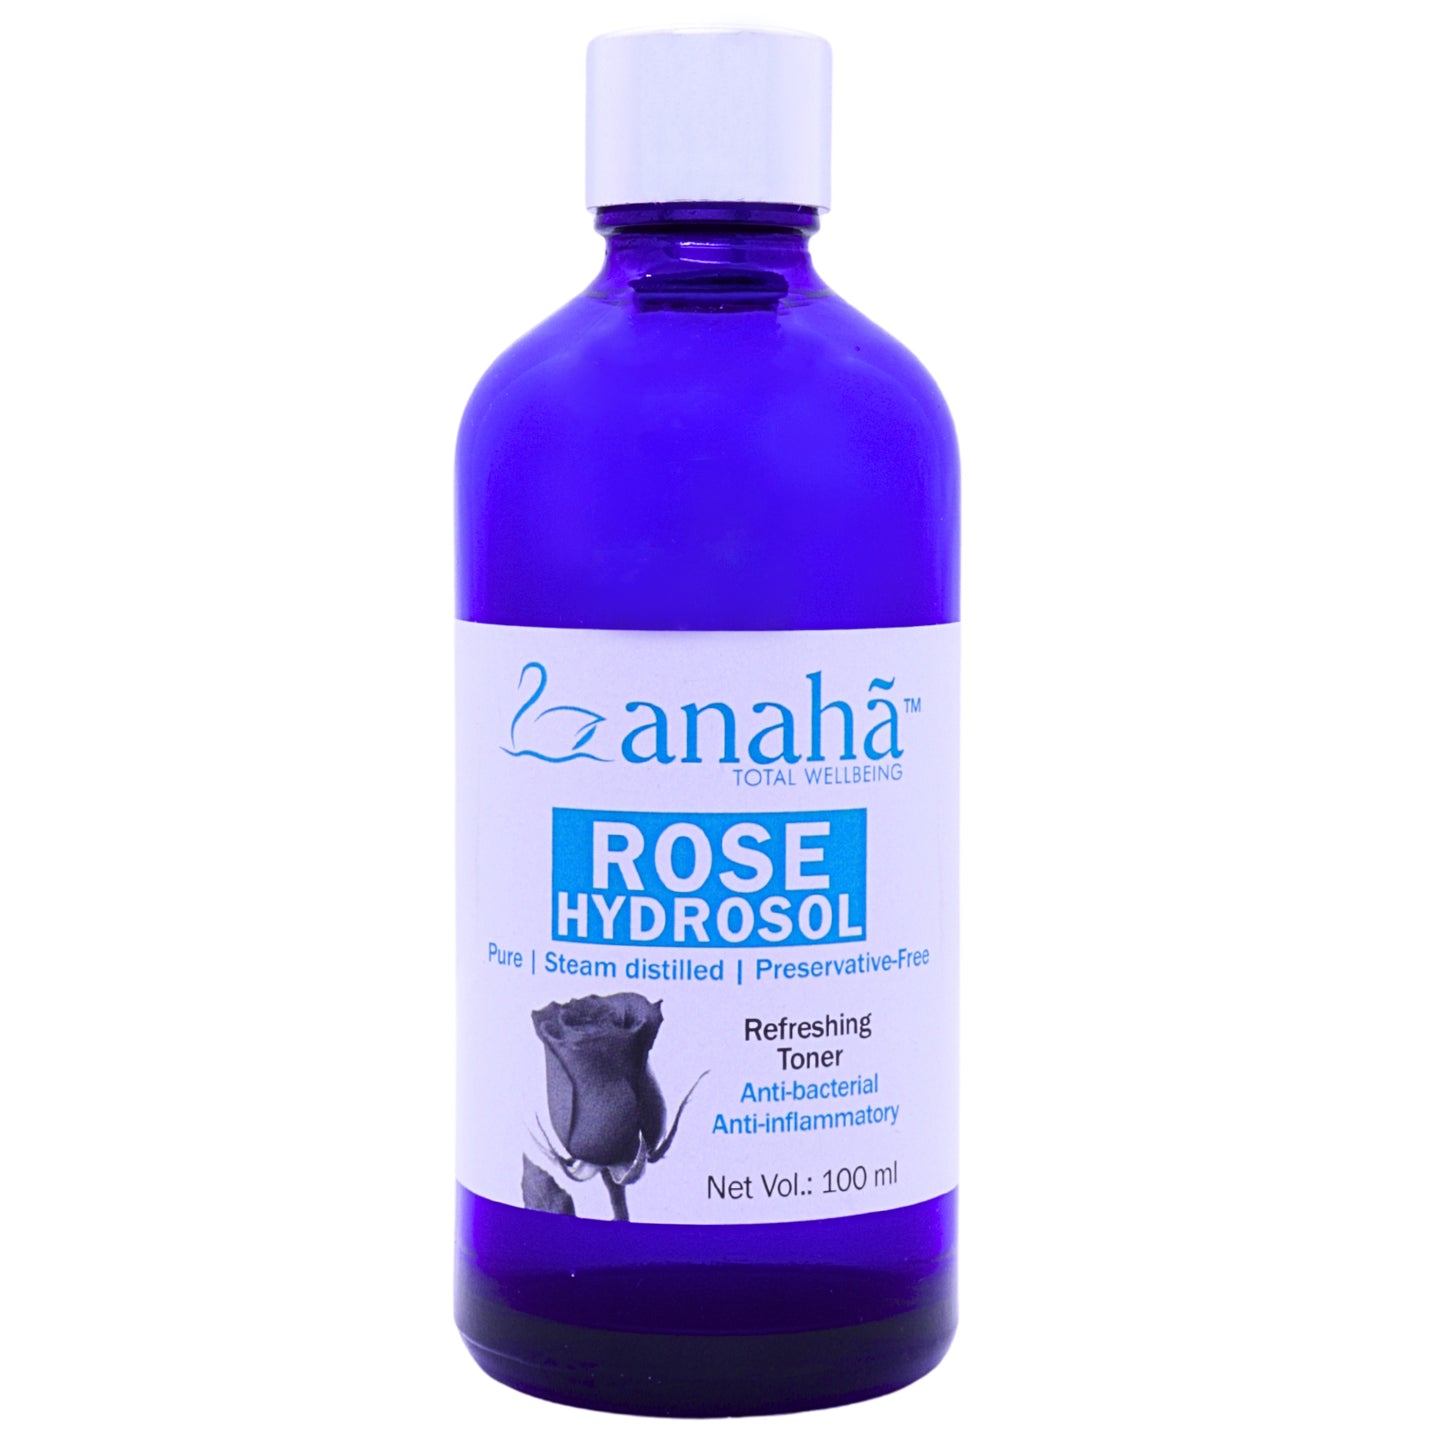 Anaha Rose Hydrosol |  Steam distilled, Pure, Natural, Preservative-Free Floral Rose Water Anaha